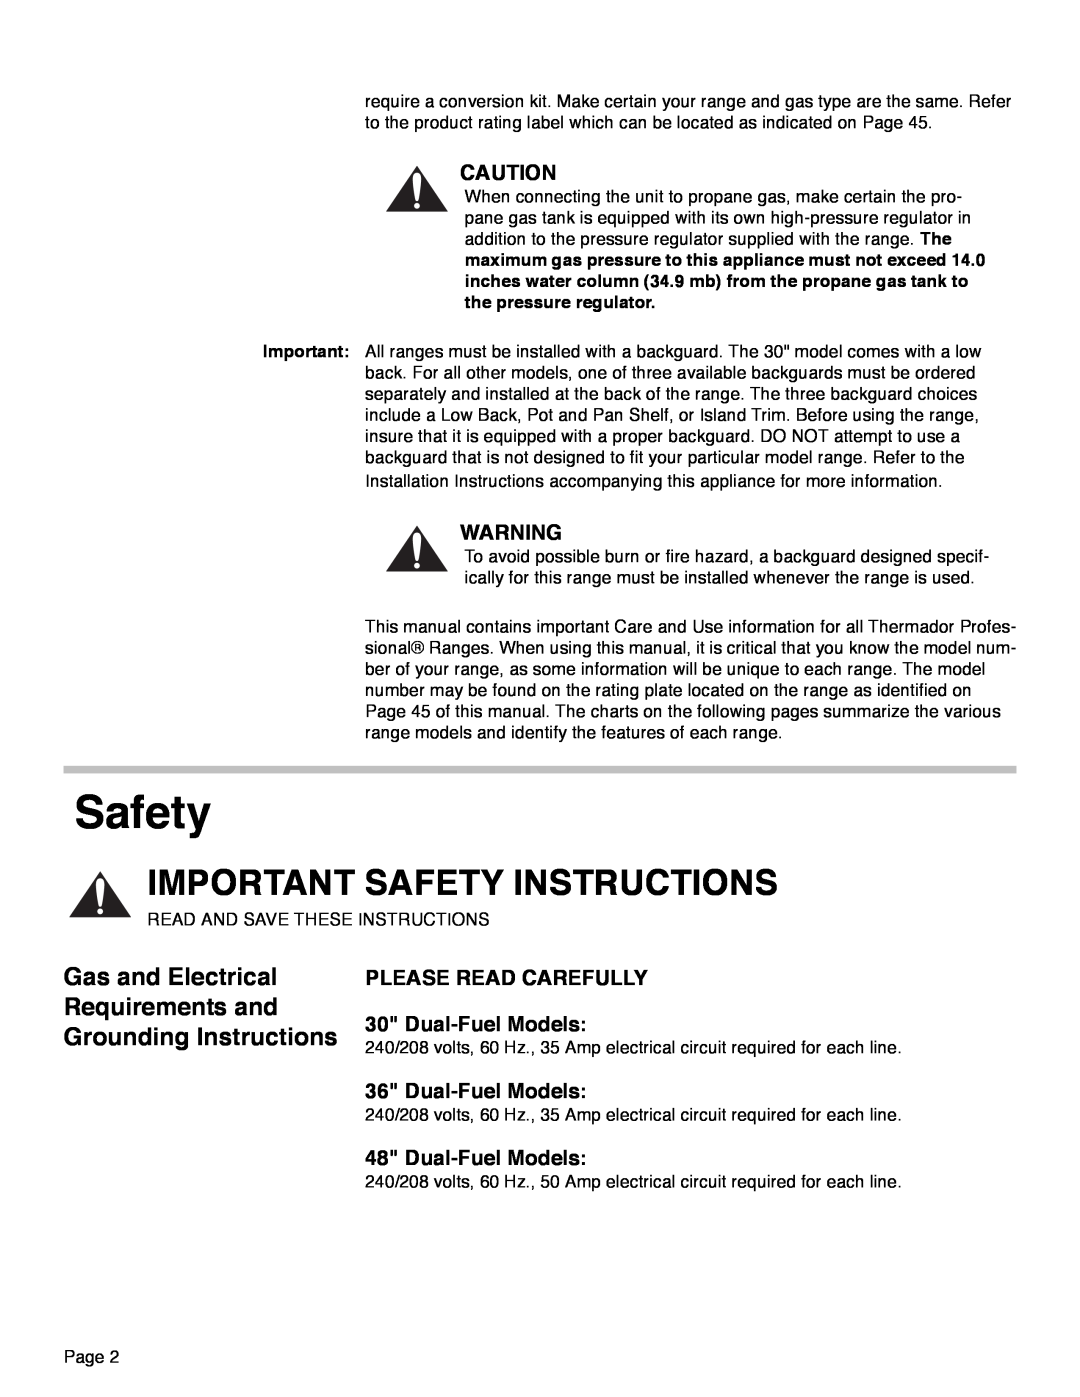 Thermador PRD30, PRD48, PRD36 Safety, Gas and Electrical, Requirements and, Grounding Instructions, Please Read Carefully 